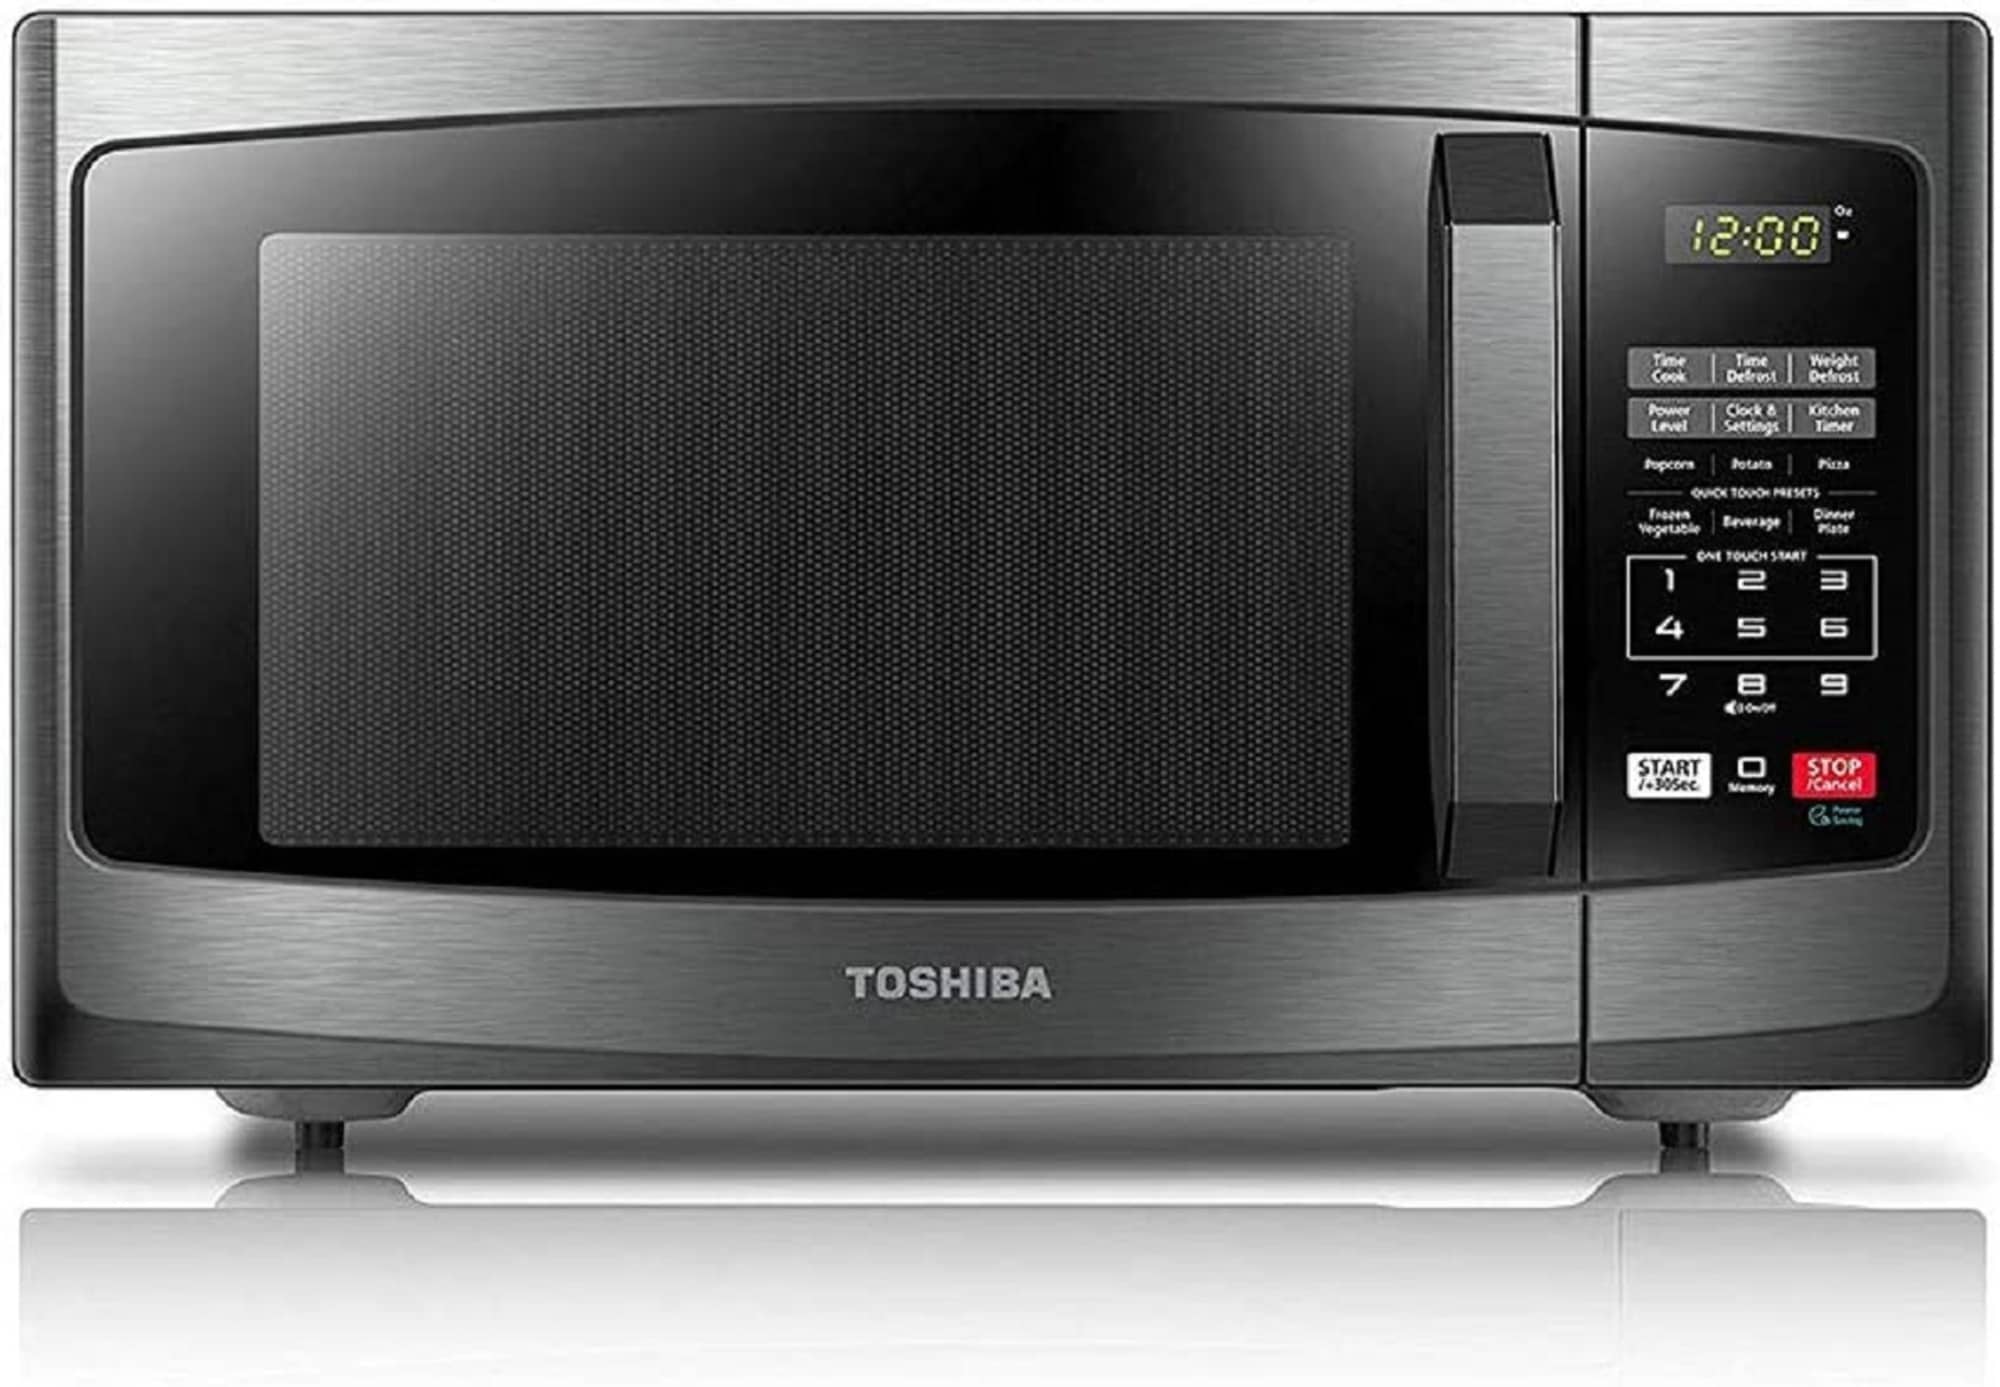 Toshiba Toaster Oven - A Review